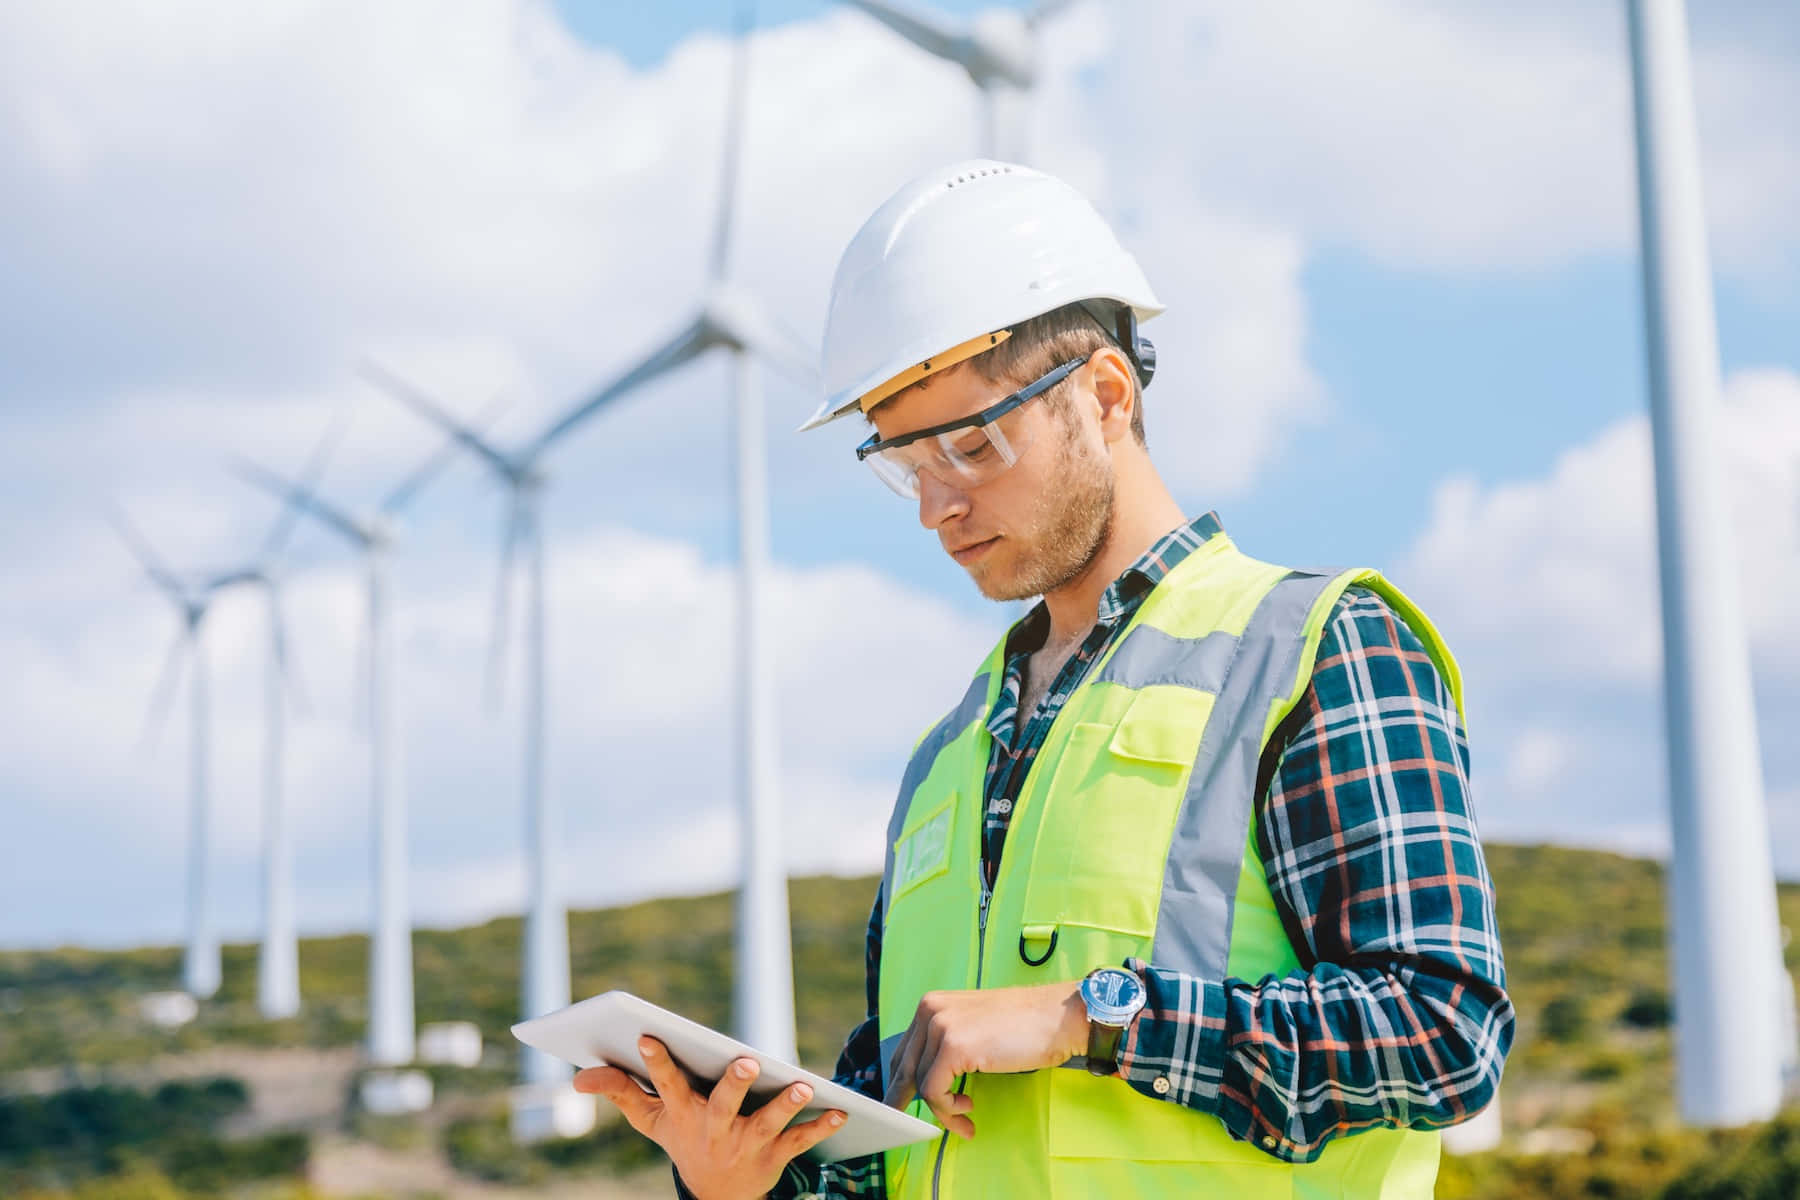 A Man In Hard Hat And Vest Is Using A Tablet In Front Of Wind Turbines